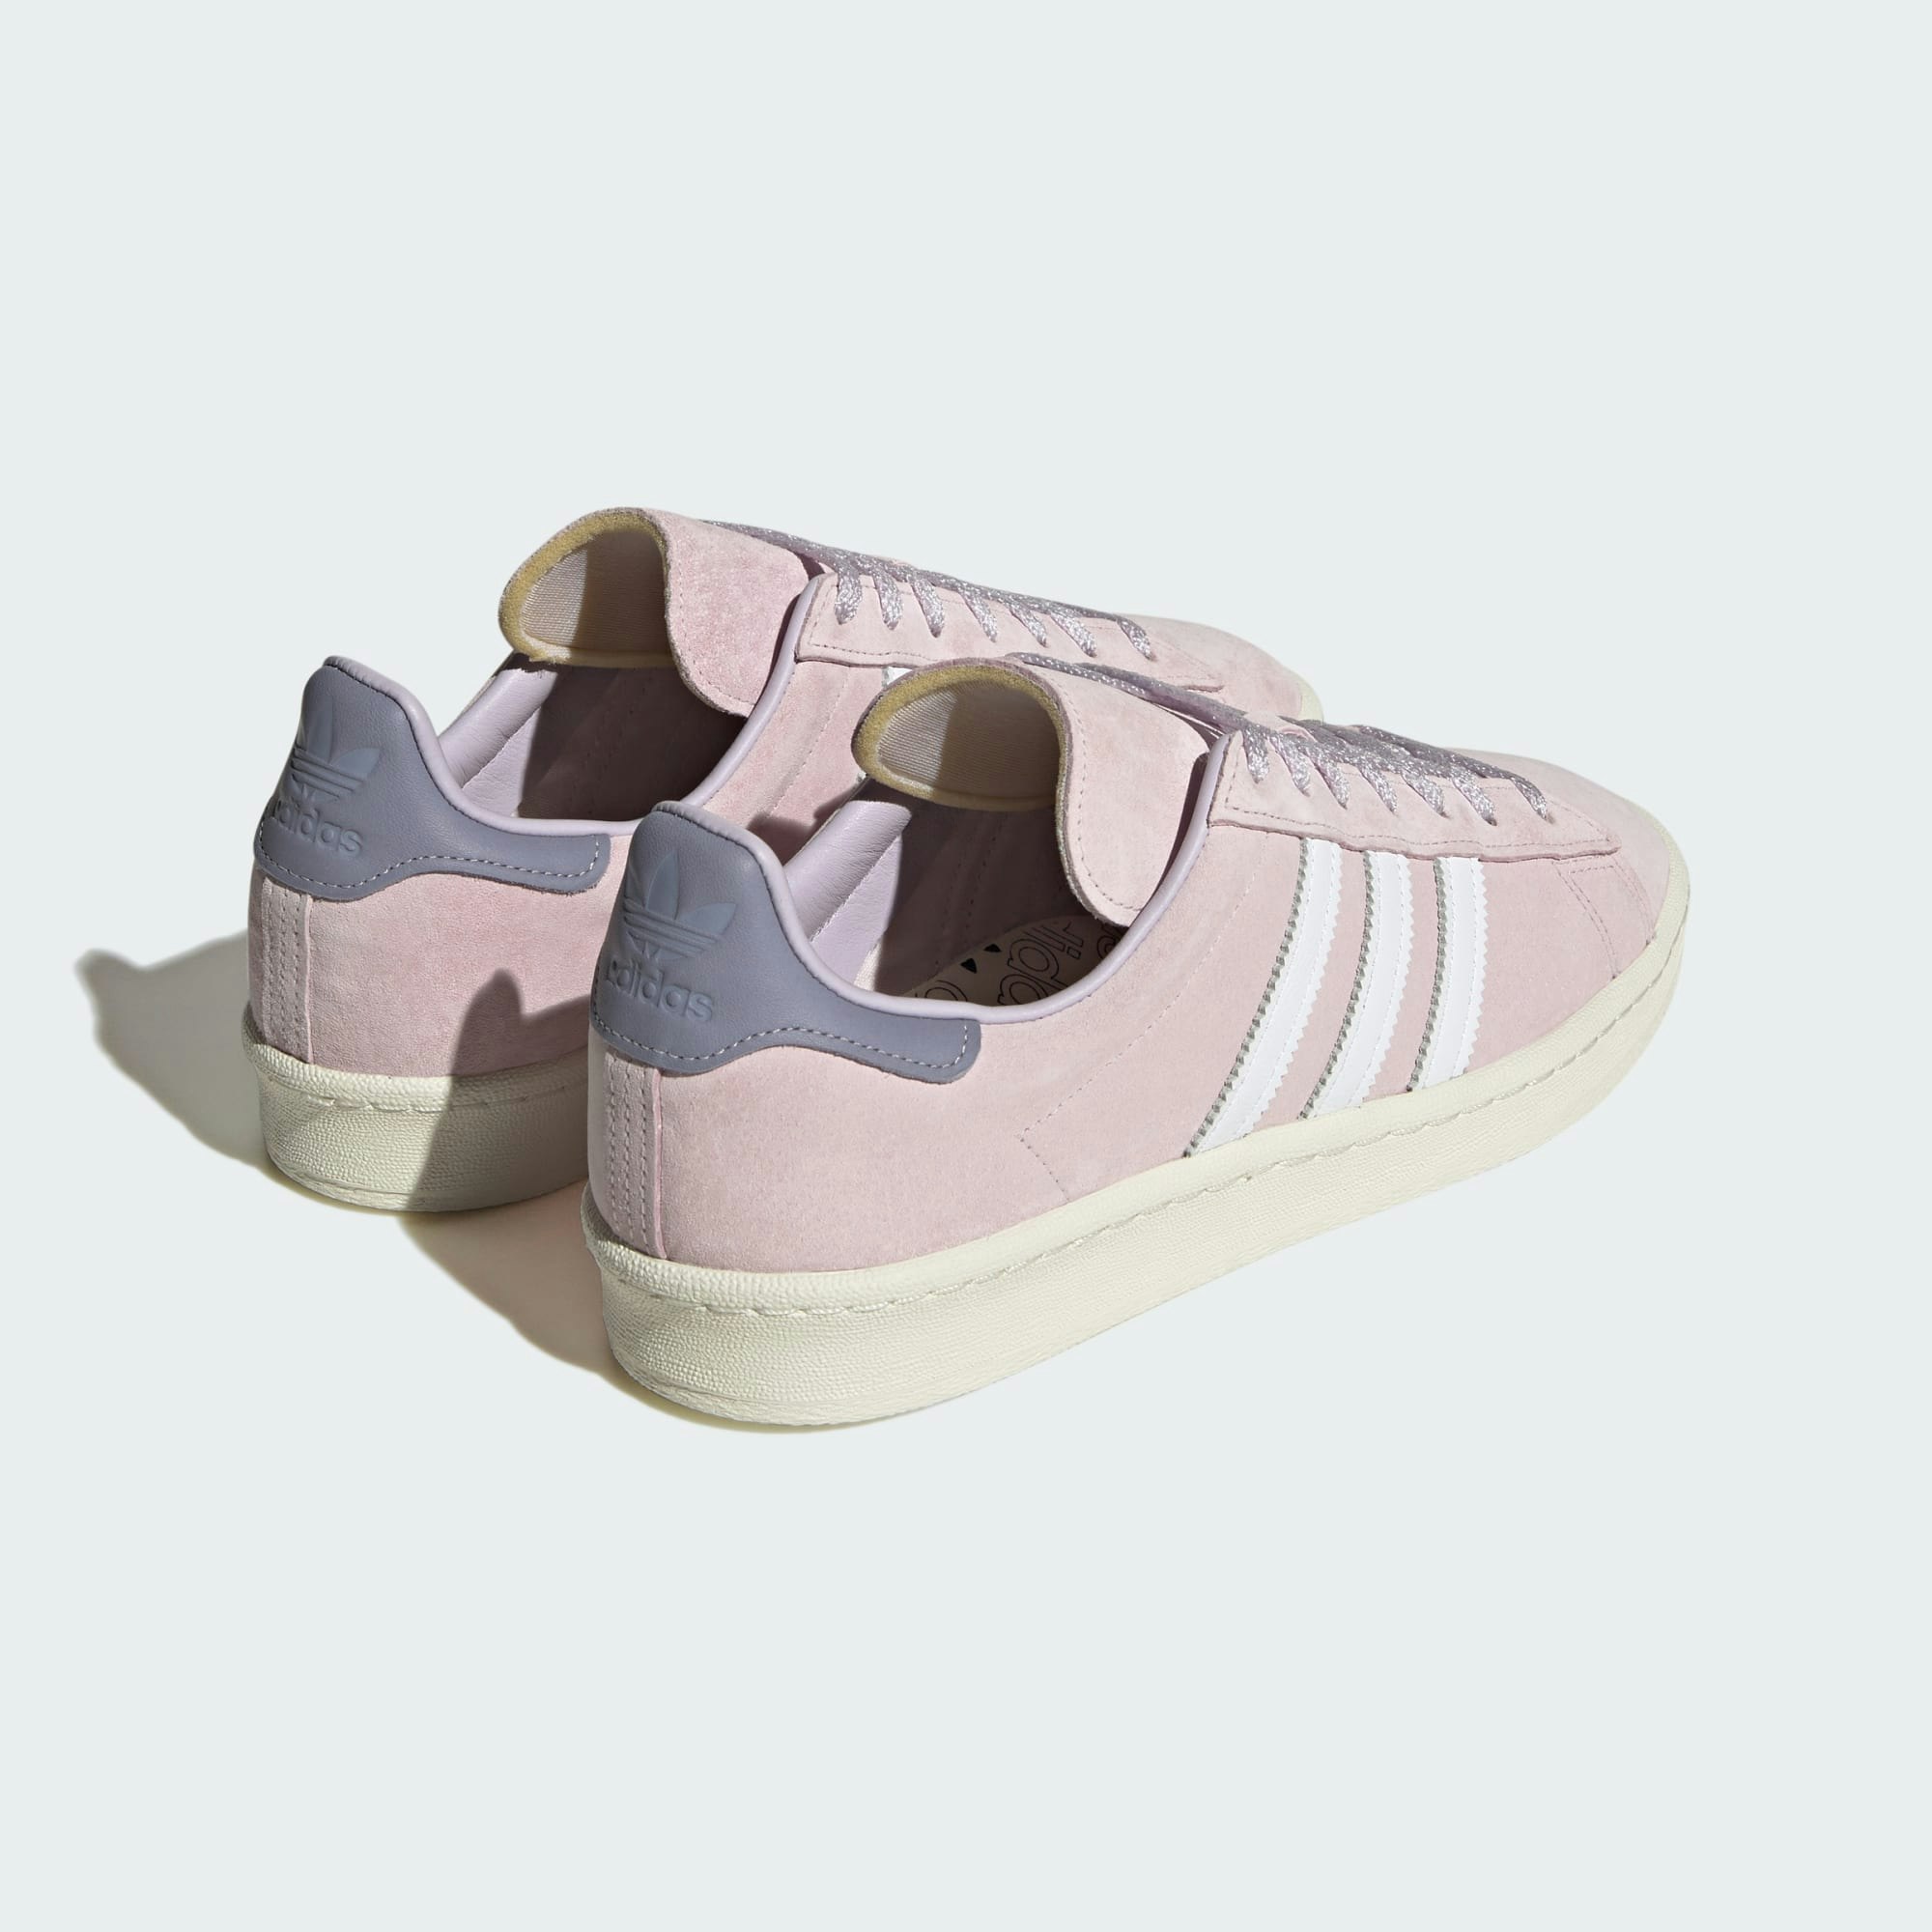 adidas Campus 80s "Almost Pink"